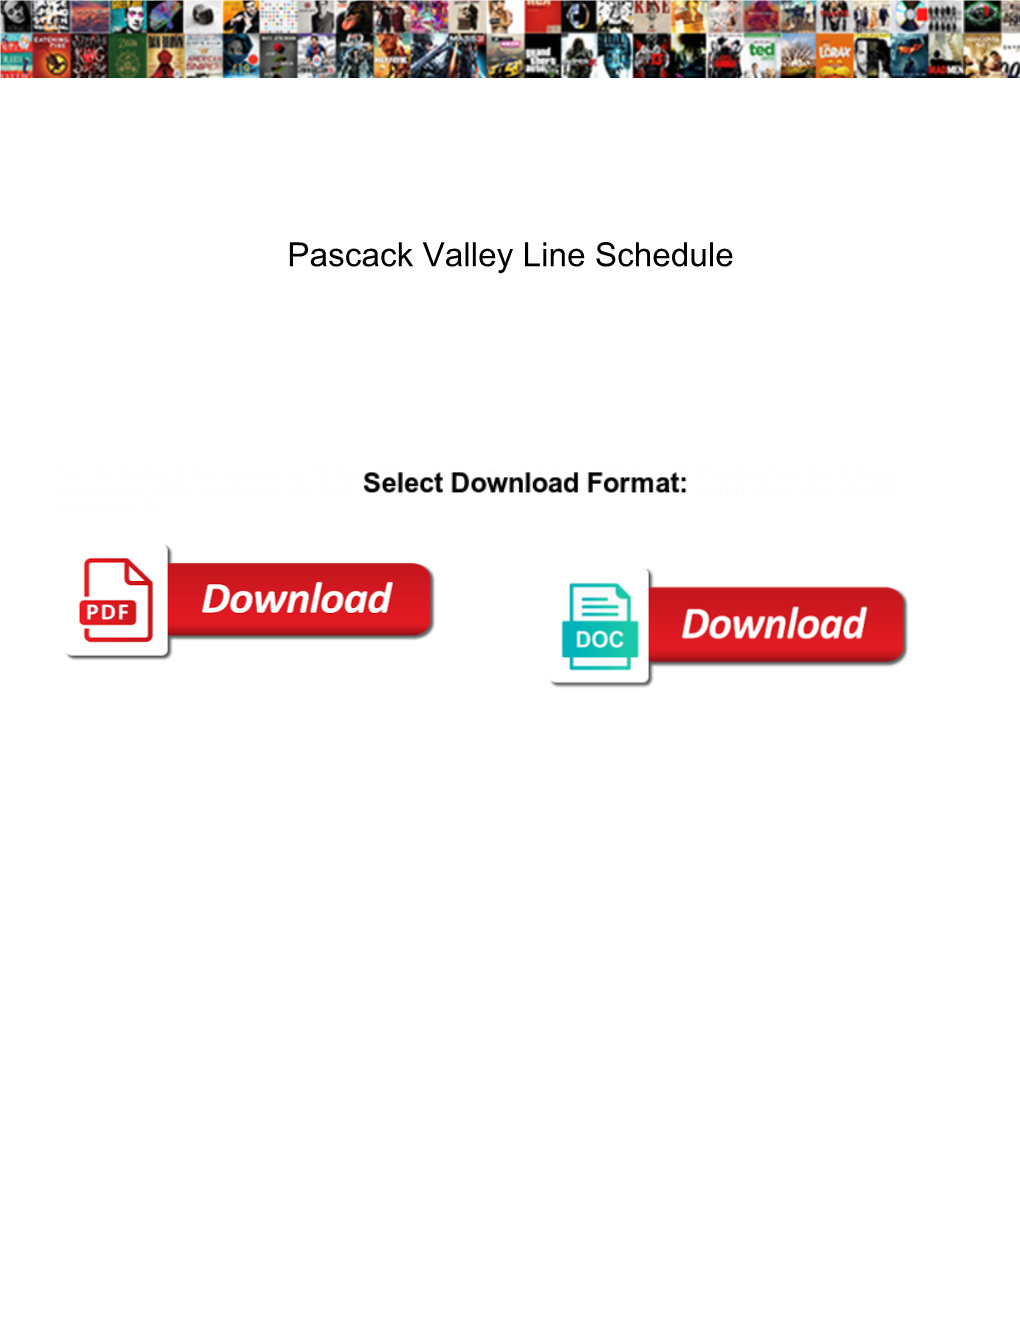 Pascack Valley Line Schedule